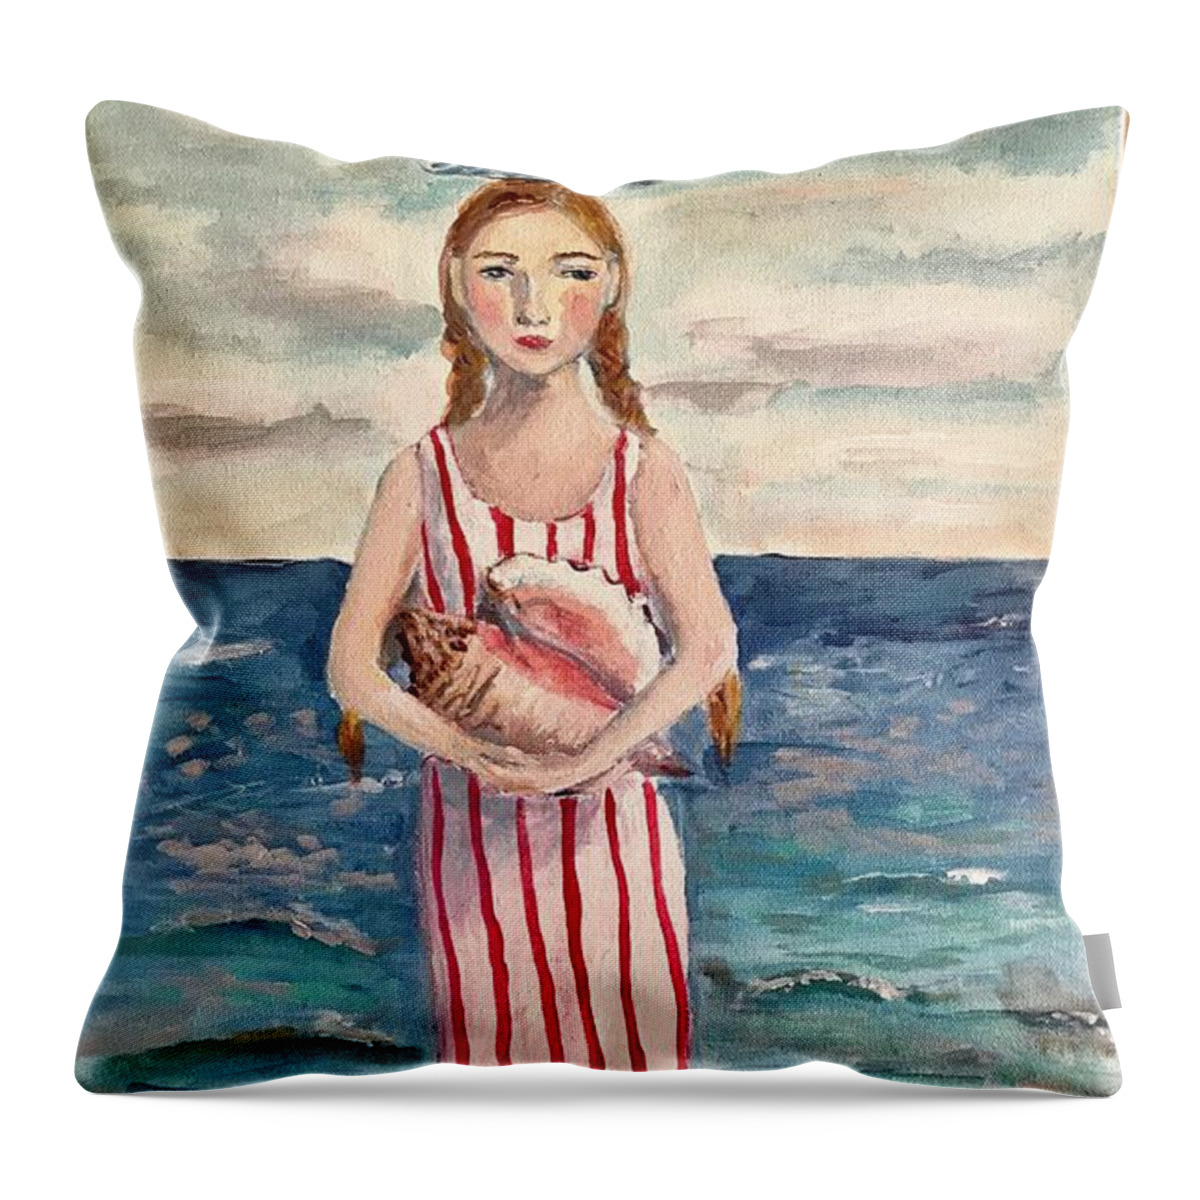 Ship In A Bottle Throw Pillow featuring the painting Beachcomber by Julie Whitmore